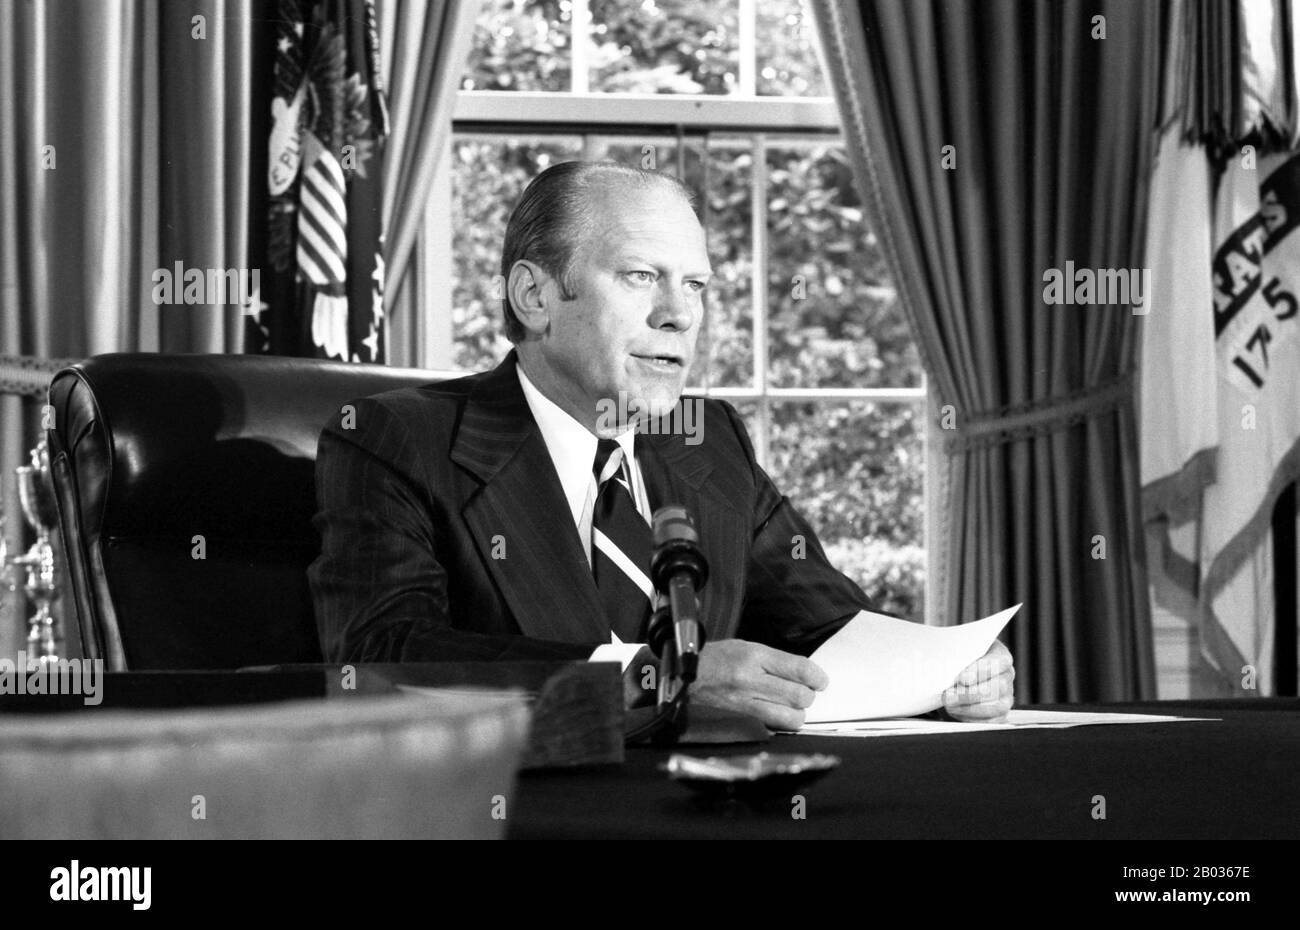 Gerald Rudolph Ford, Jr. (born Leslie Lynch King, Jr.; July 14, 1913 – December 26, 2006) was an American politician who served as the 38th President of the United States from 1974 to 1977. Prior to this he was the 40th Vice President of the United States, serving from 1973 until President Richard Nixon's resignation in 1974. Stock Photo